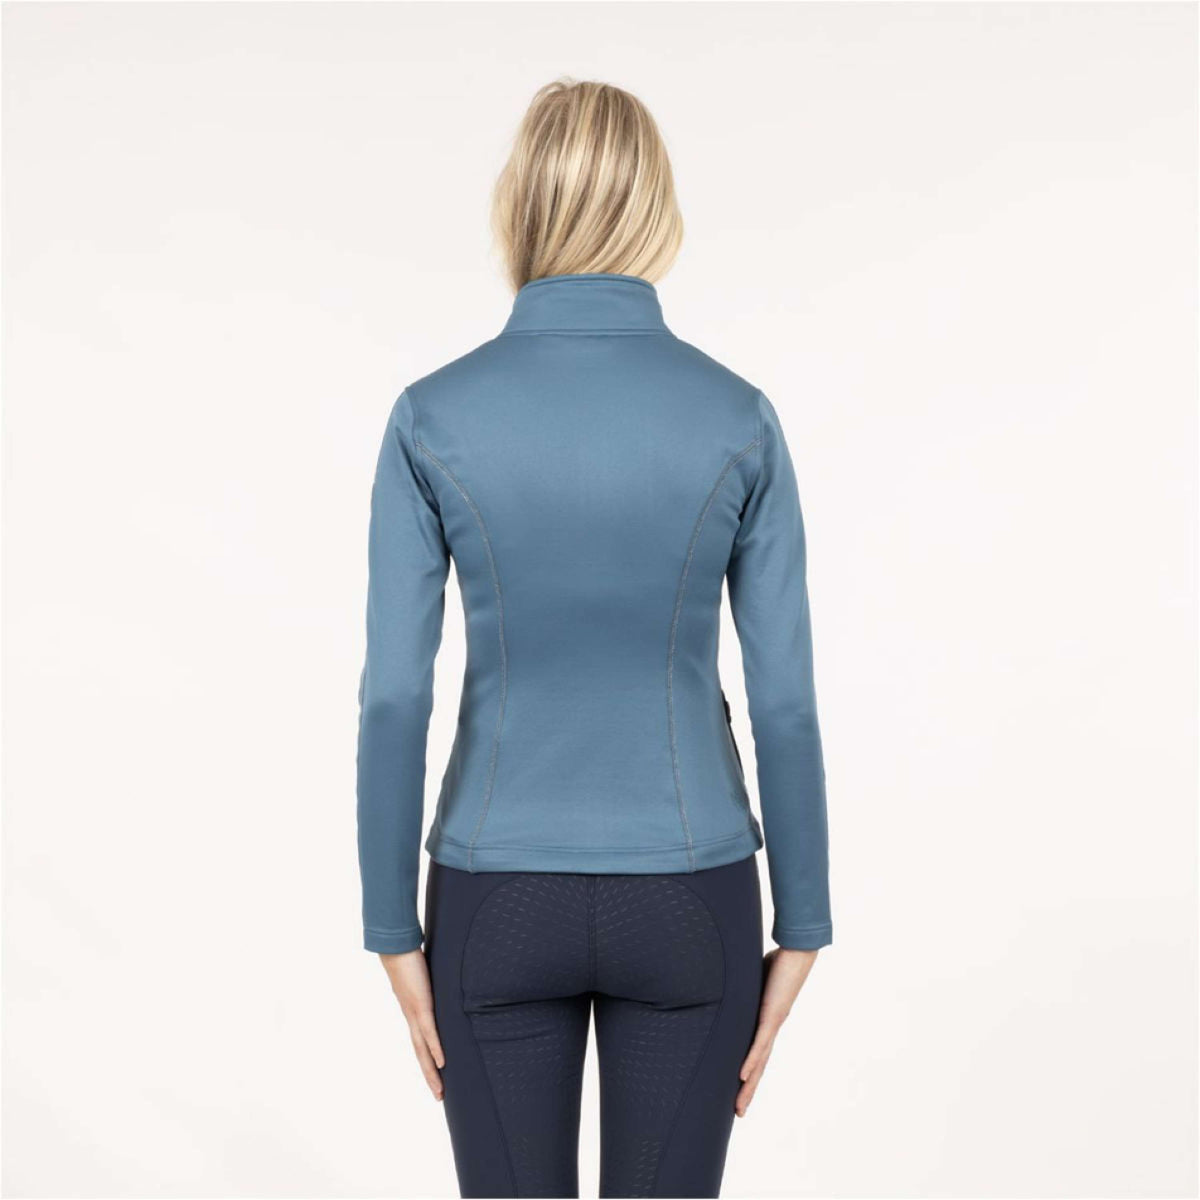 ANKY Jacke Technostretch Taped Ocean View